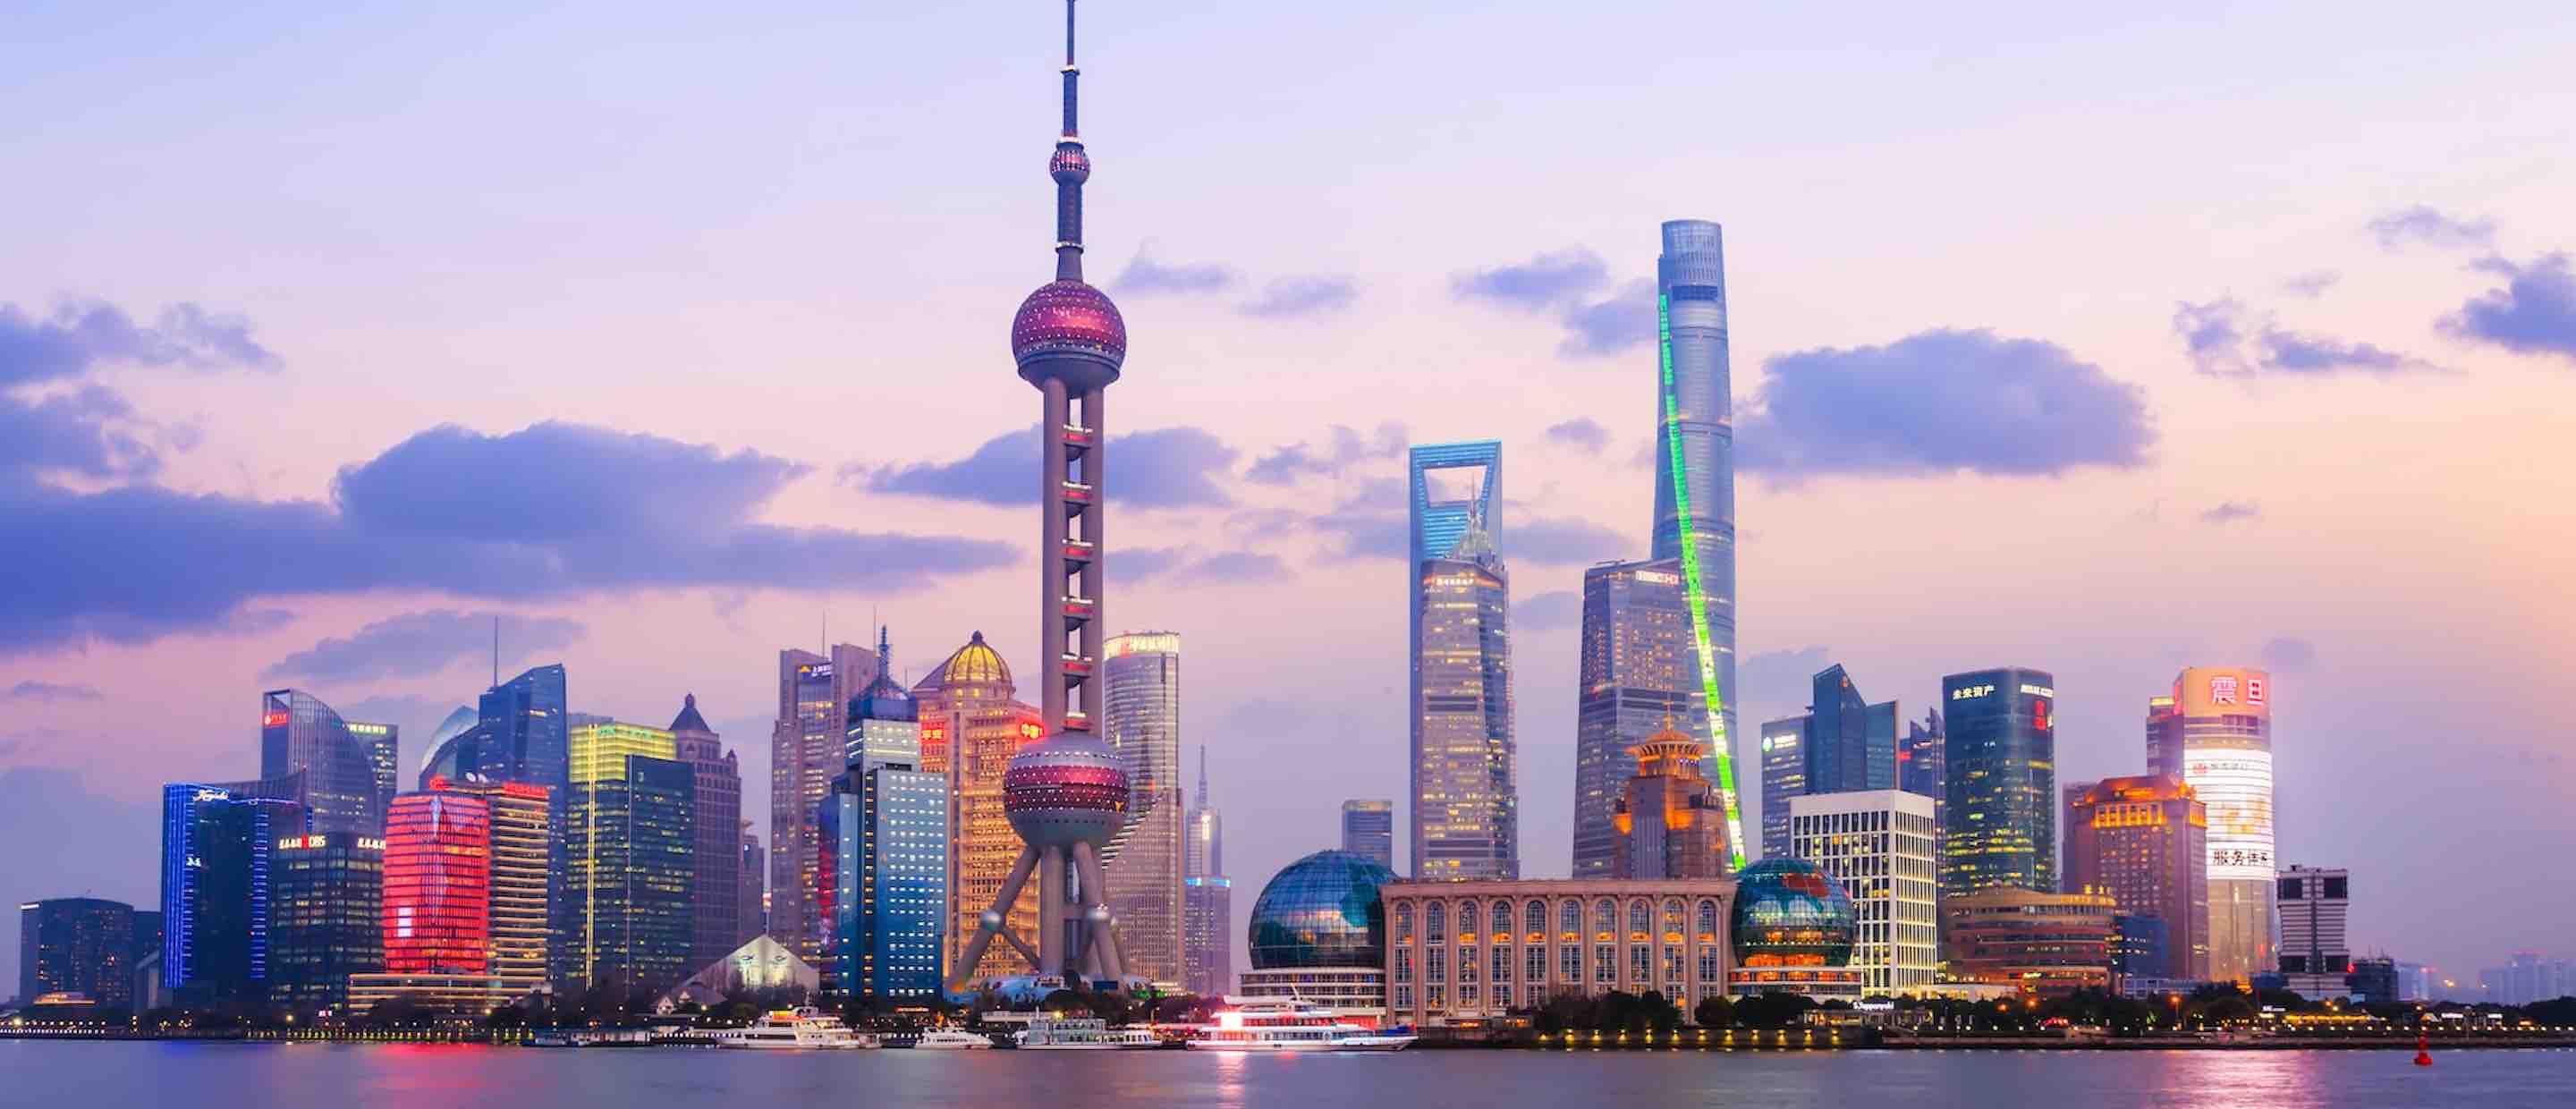 EM corporate bonds benefit from China reopening | Deutsche wealth management services